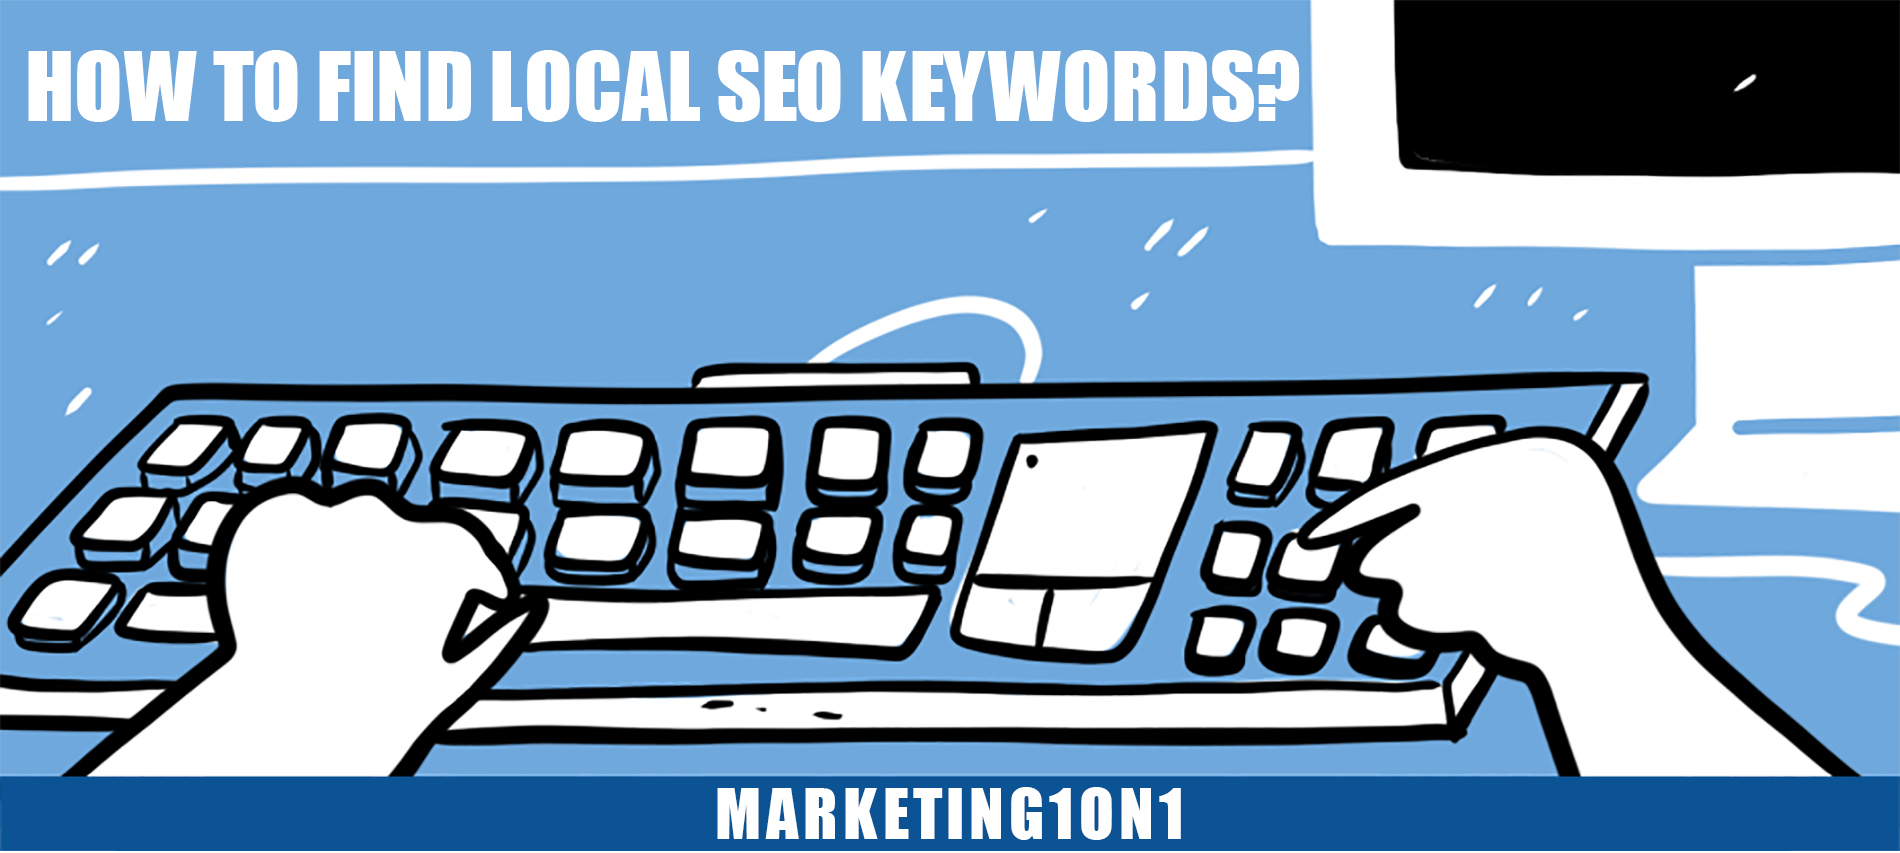 How to find local SEO keywords?